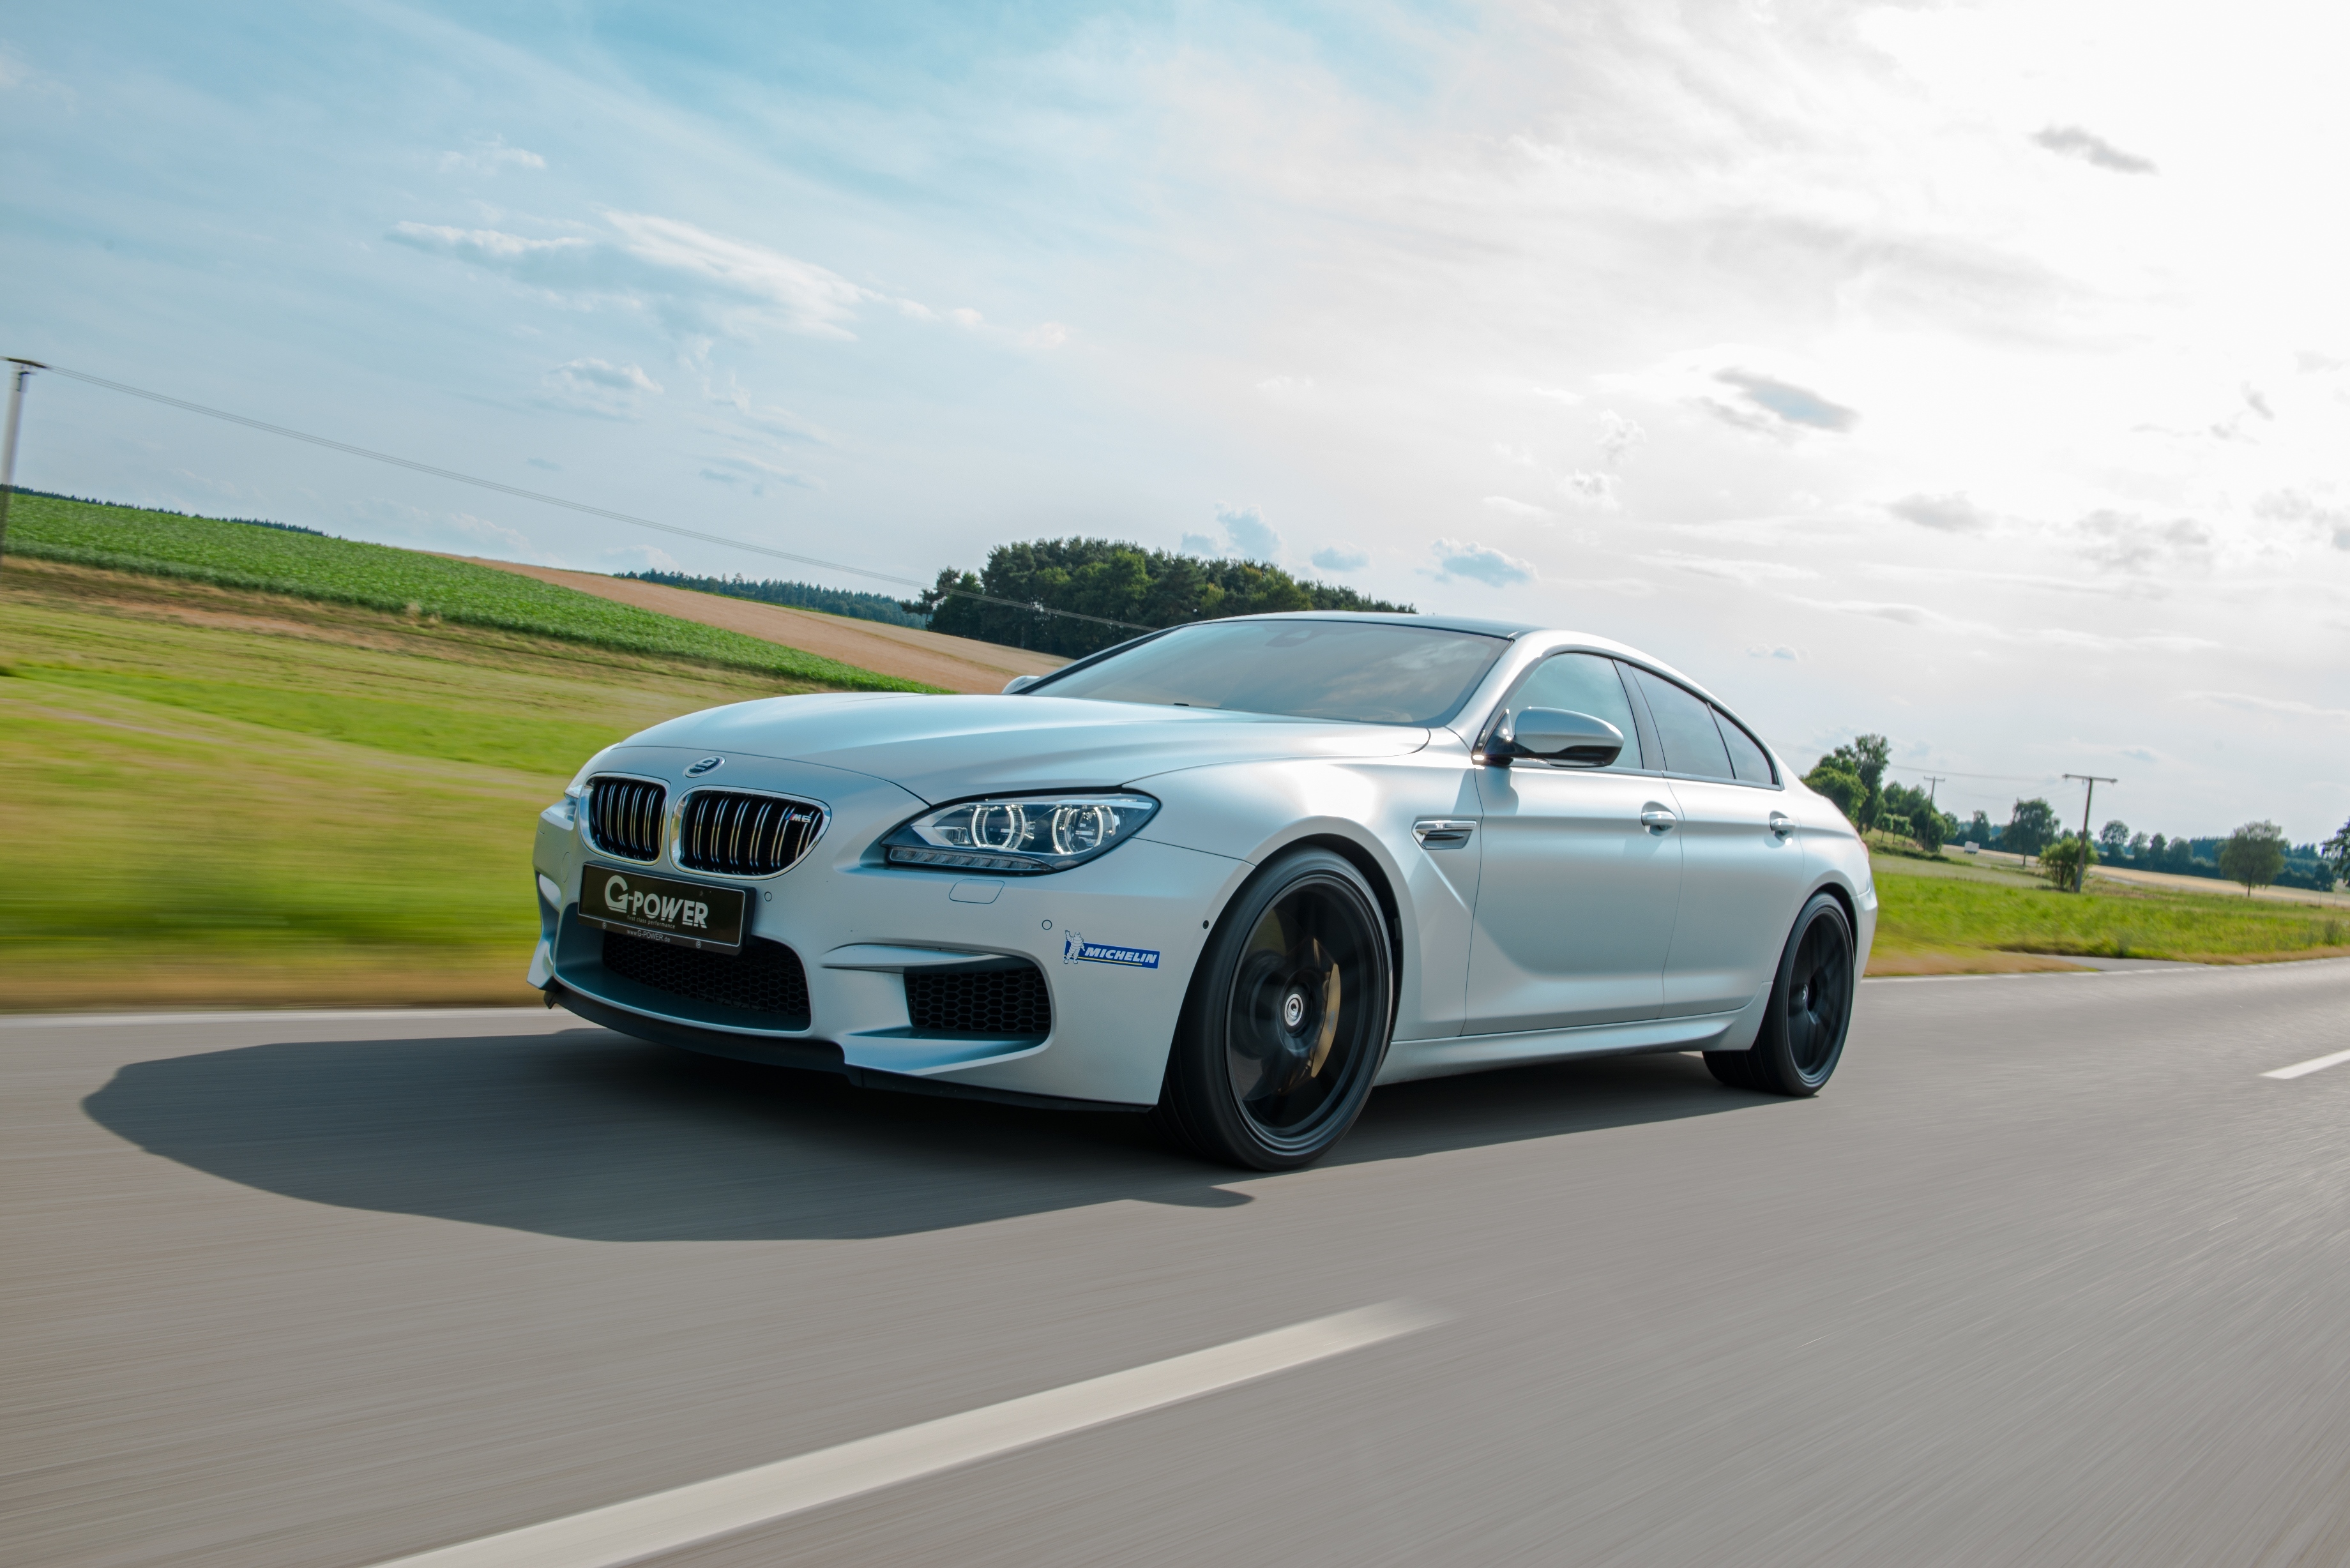 side view, bmw, cars, traffic, movement, speed, m6, g power